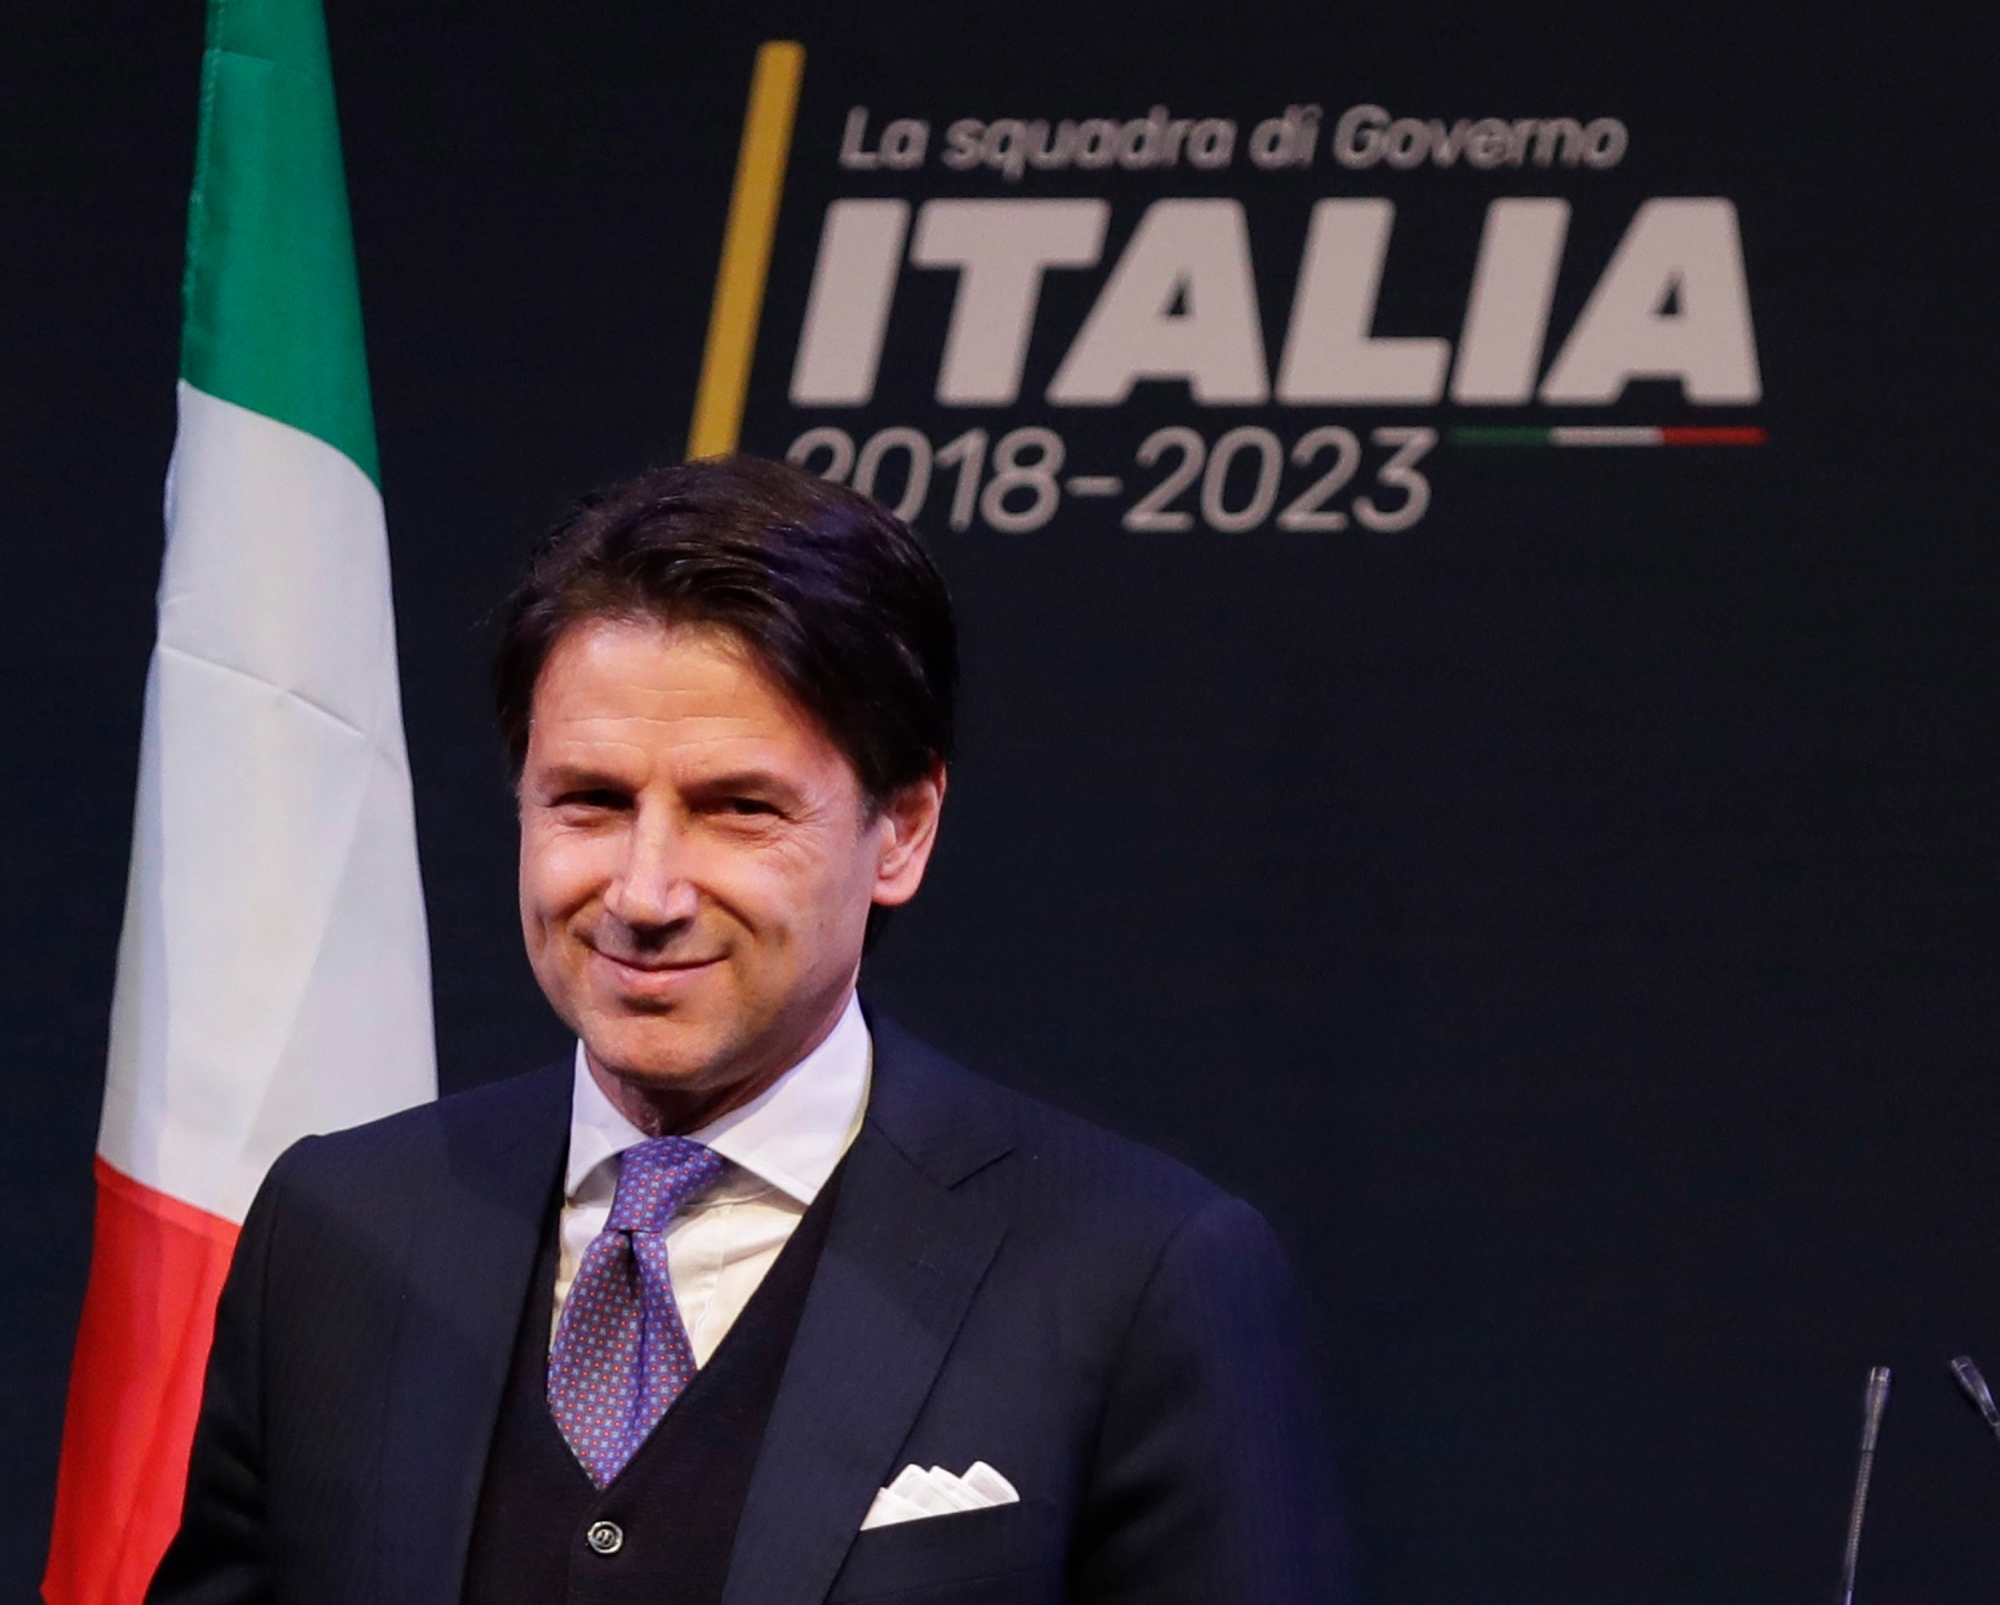 In this photo taken on Thursday, March 1, 2018, Giuseppe Conte attends a meeting in Rome. Italian media describe Conte as most likely to be the choice of Italy's main populist leaders to head the coalition government they hope to form.  (AP Photo/Alessandra Tarantino) Italy Politics